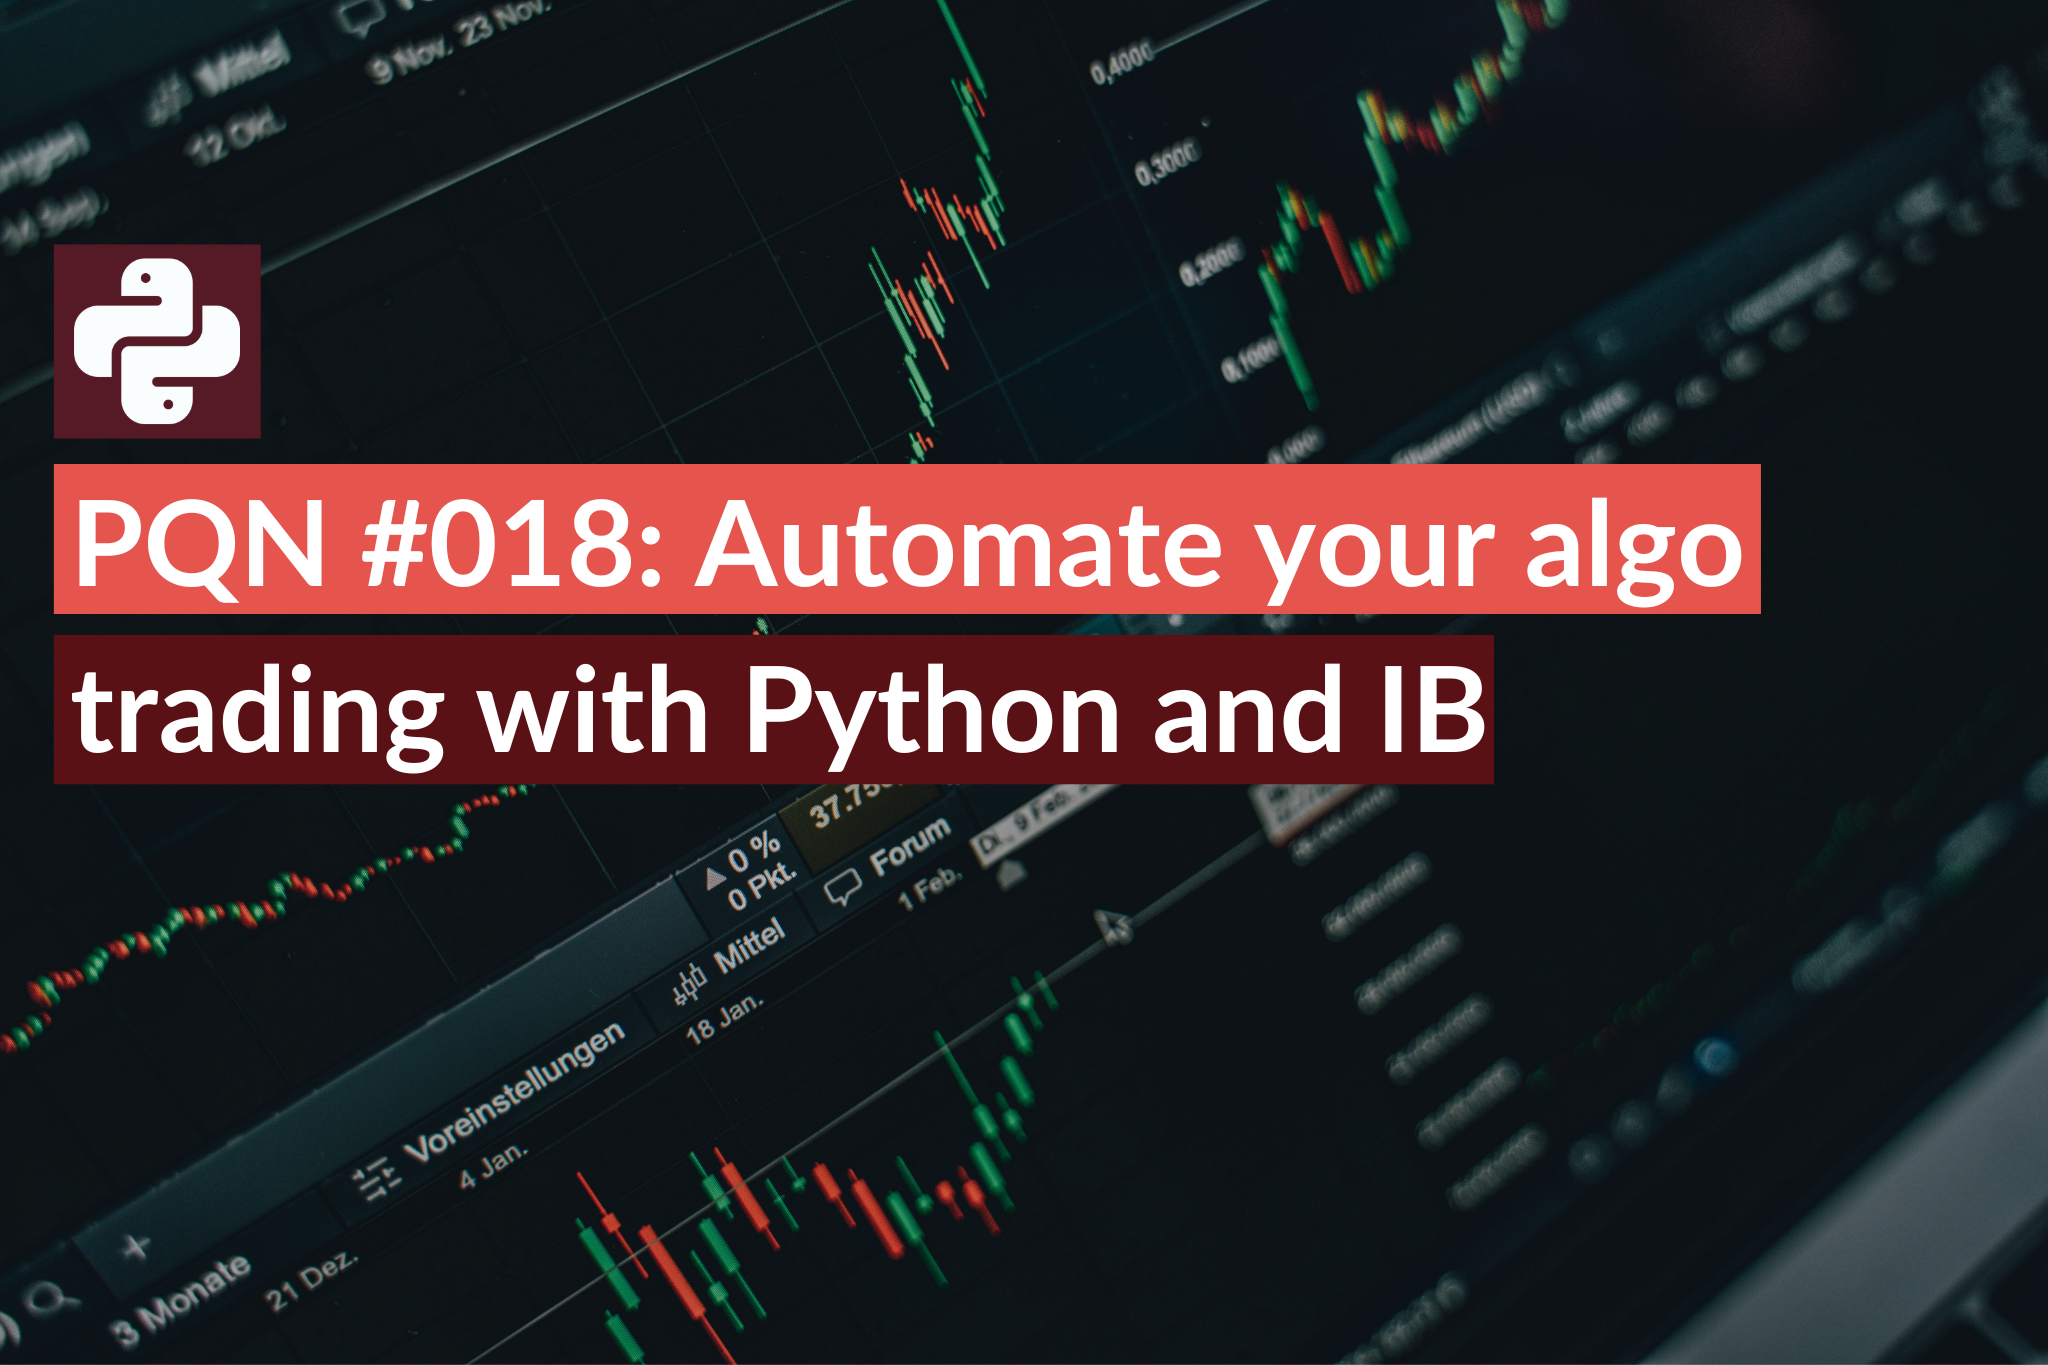 PQN #018 Automate your algo trading with Python and IB